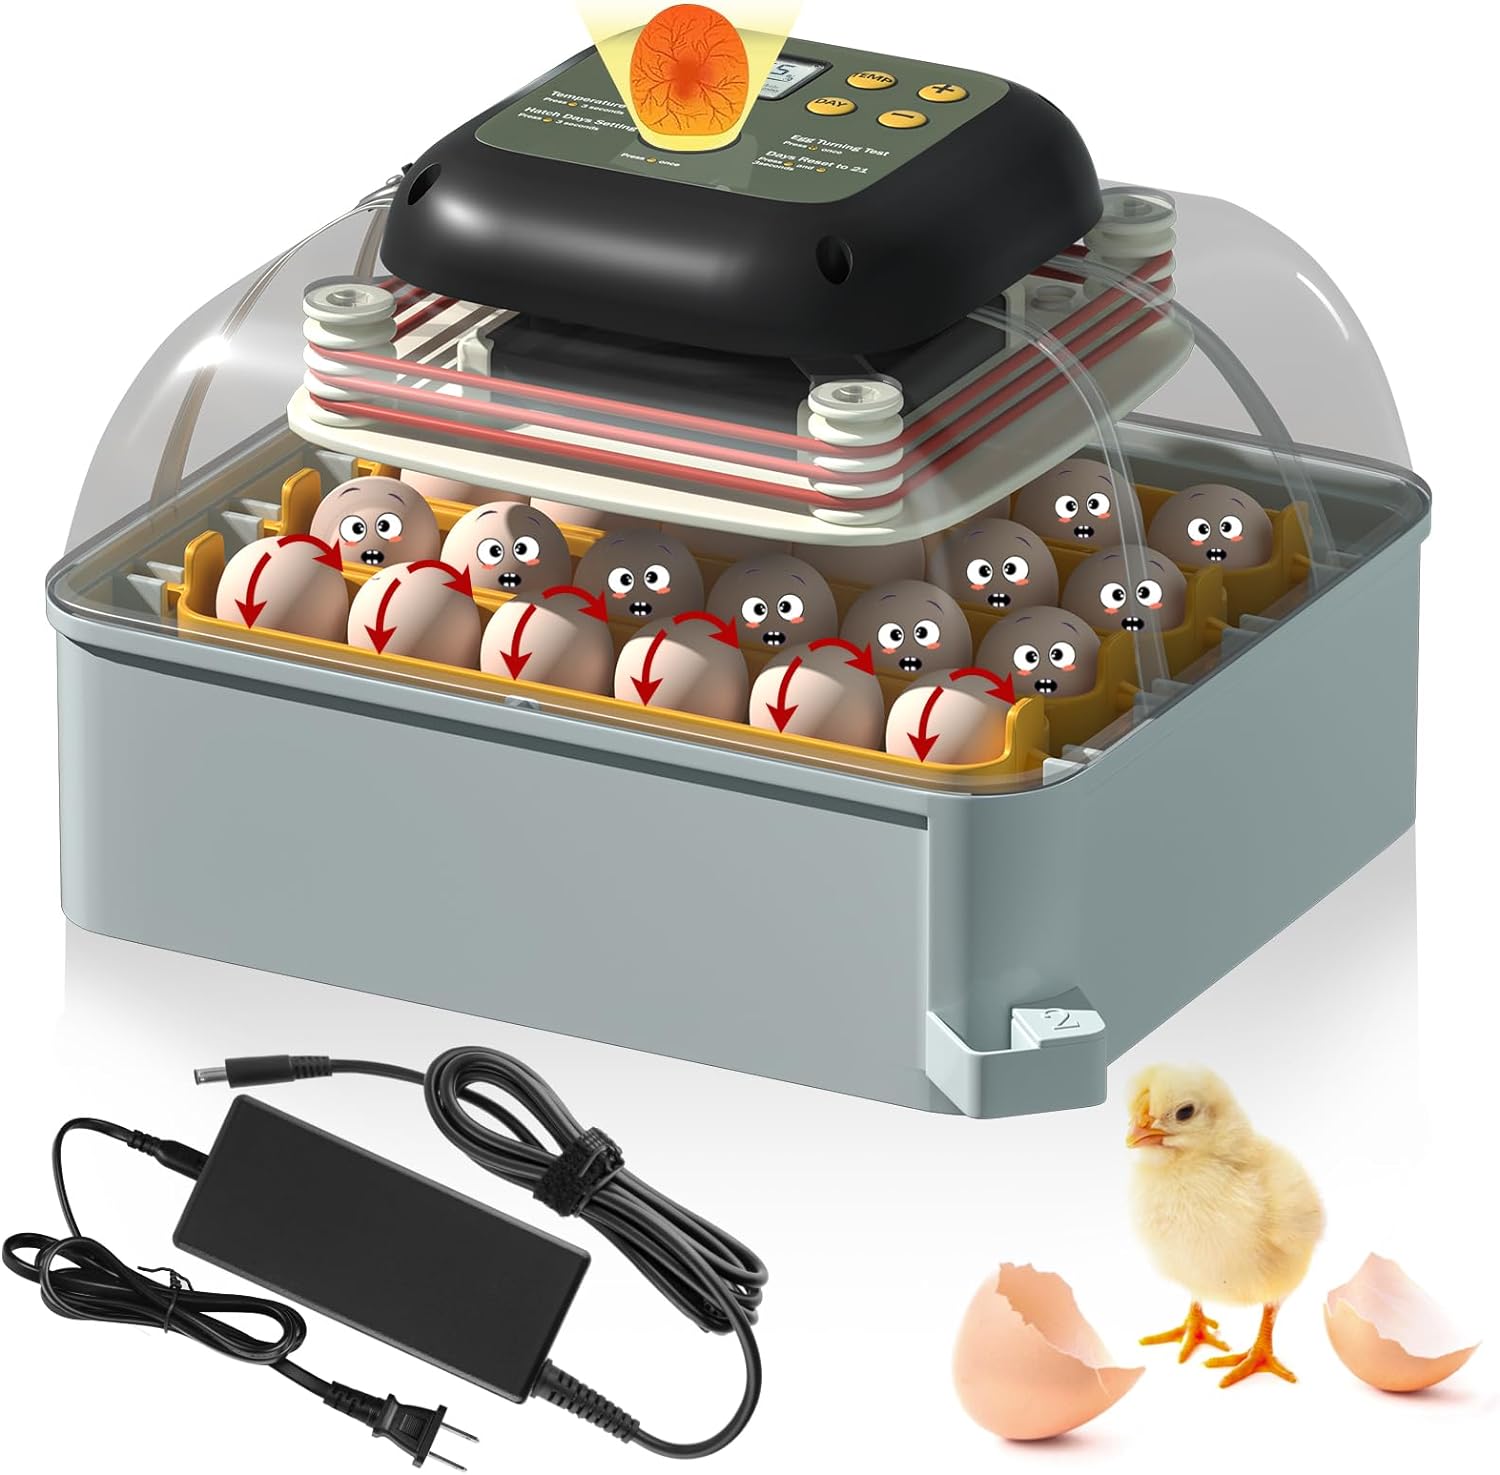 Time-Sensitive: Chicken Egg Incubator with Automatic Egg Turning, Humidity Control, and Temperature Control - Save 11%!